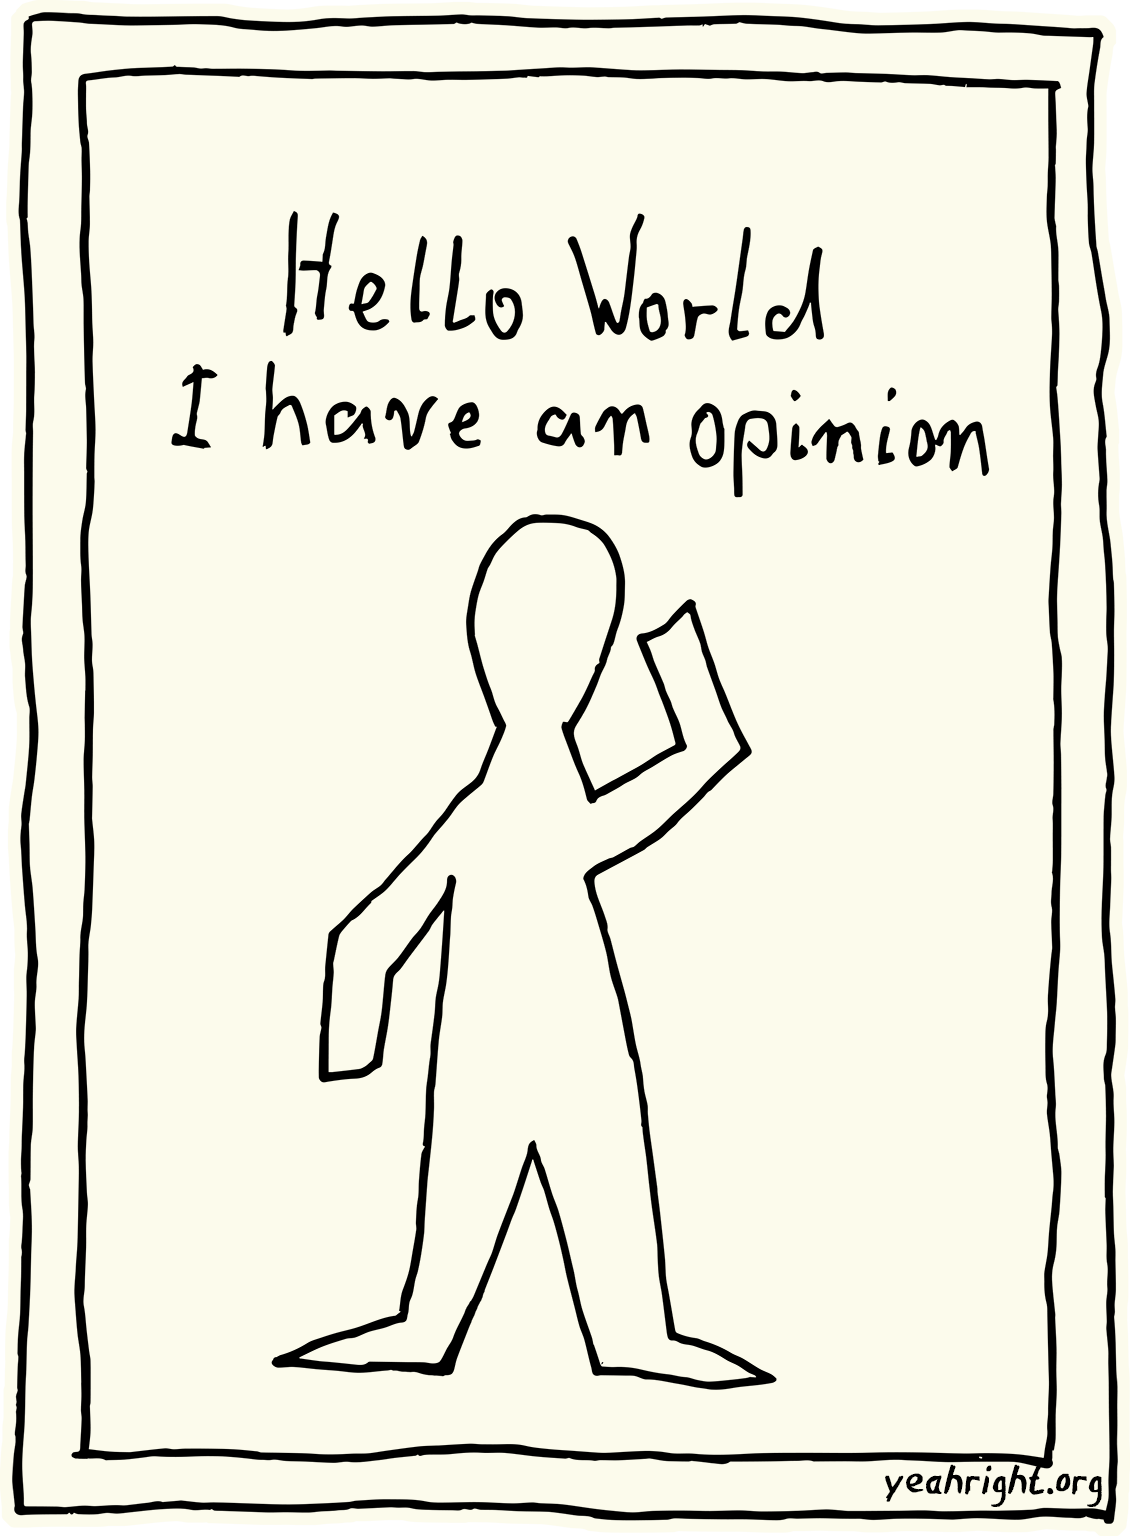 Yeah Right! with one hand up, says: Hello World I have an opinion